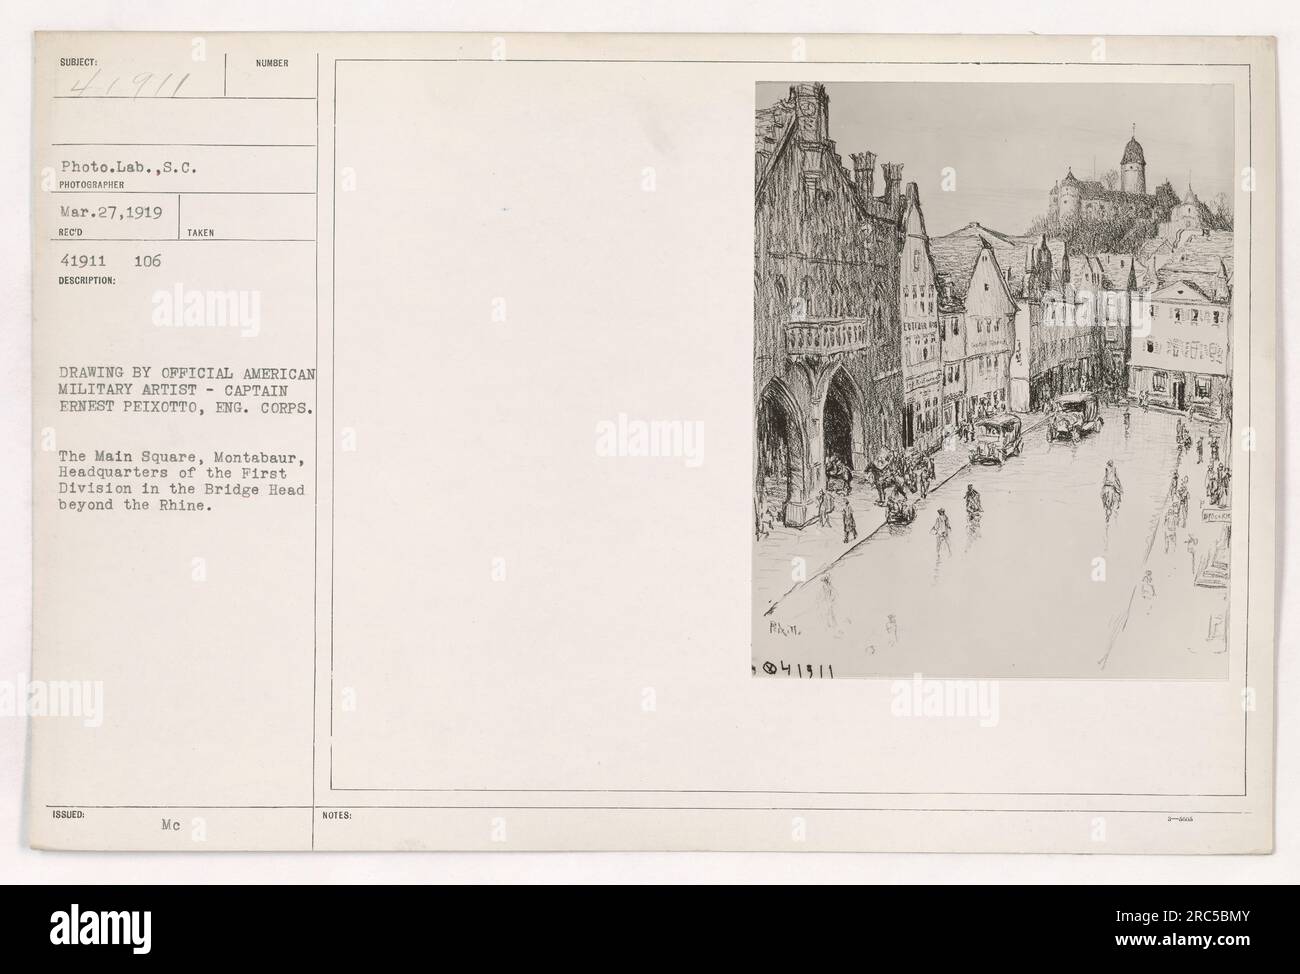 Official drawing by Captain Ernest Peixotto, Engineering Corps, depicting the main square of Montabaur, the Headquarters of the First Division during World War One. This image captures the Bridge Head beyond the Rhine. Taken by the Photo Lab in 1919 with the reference number 111-SC-41911. The caption also mentions the photograph's notes: 8041311. Stock Photo